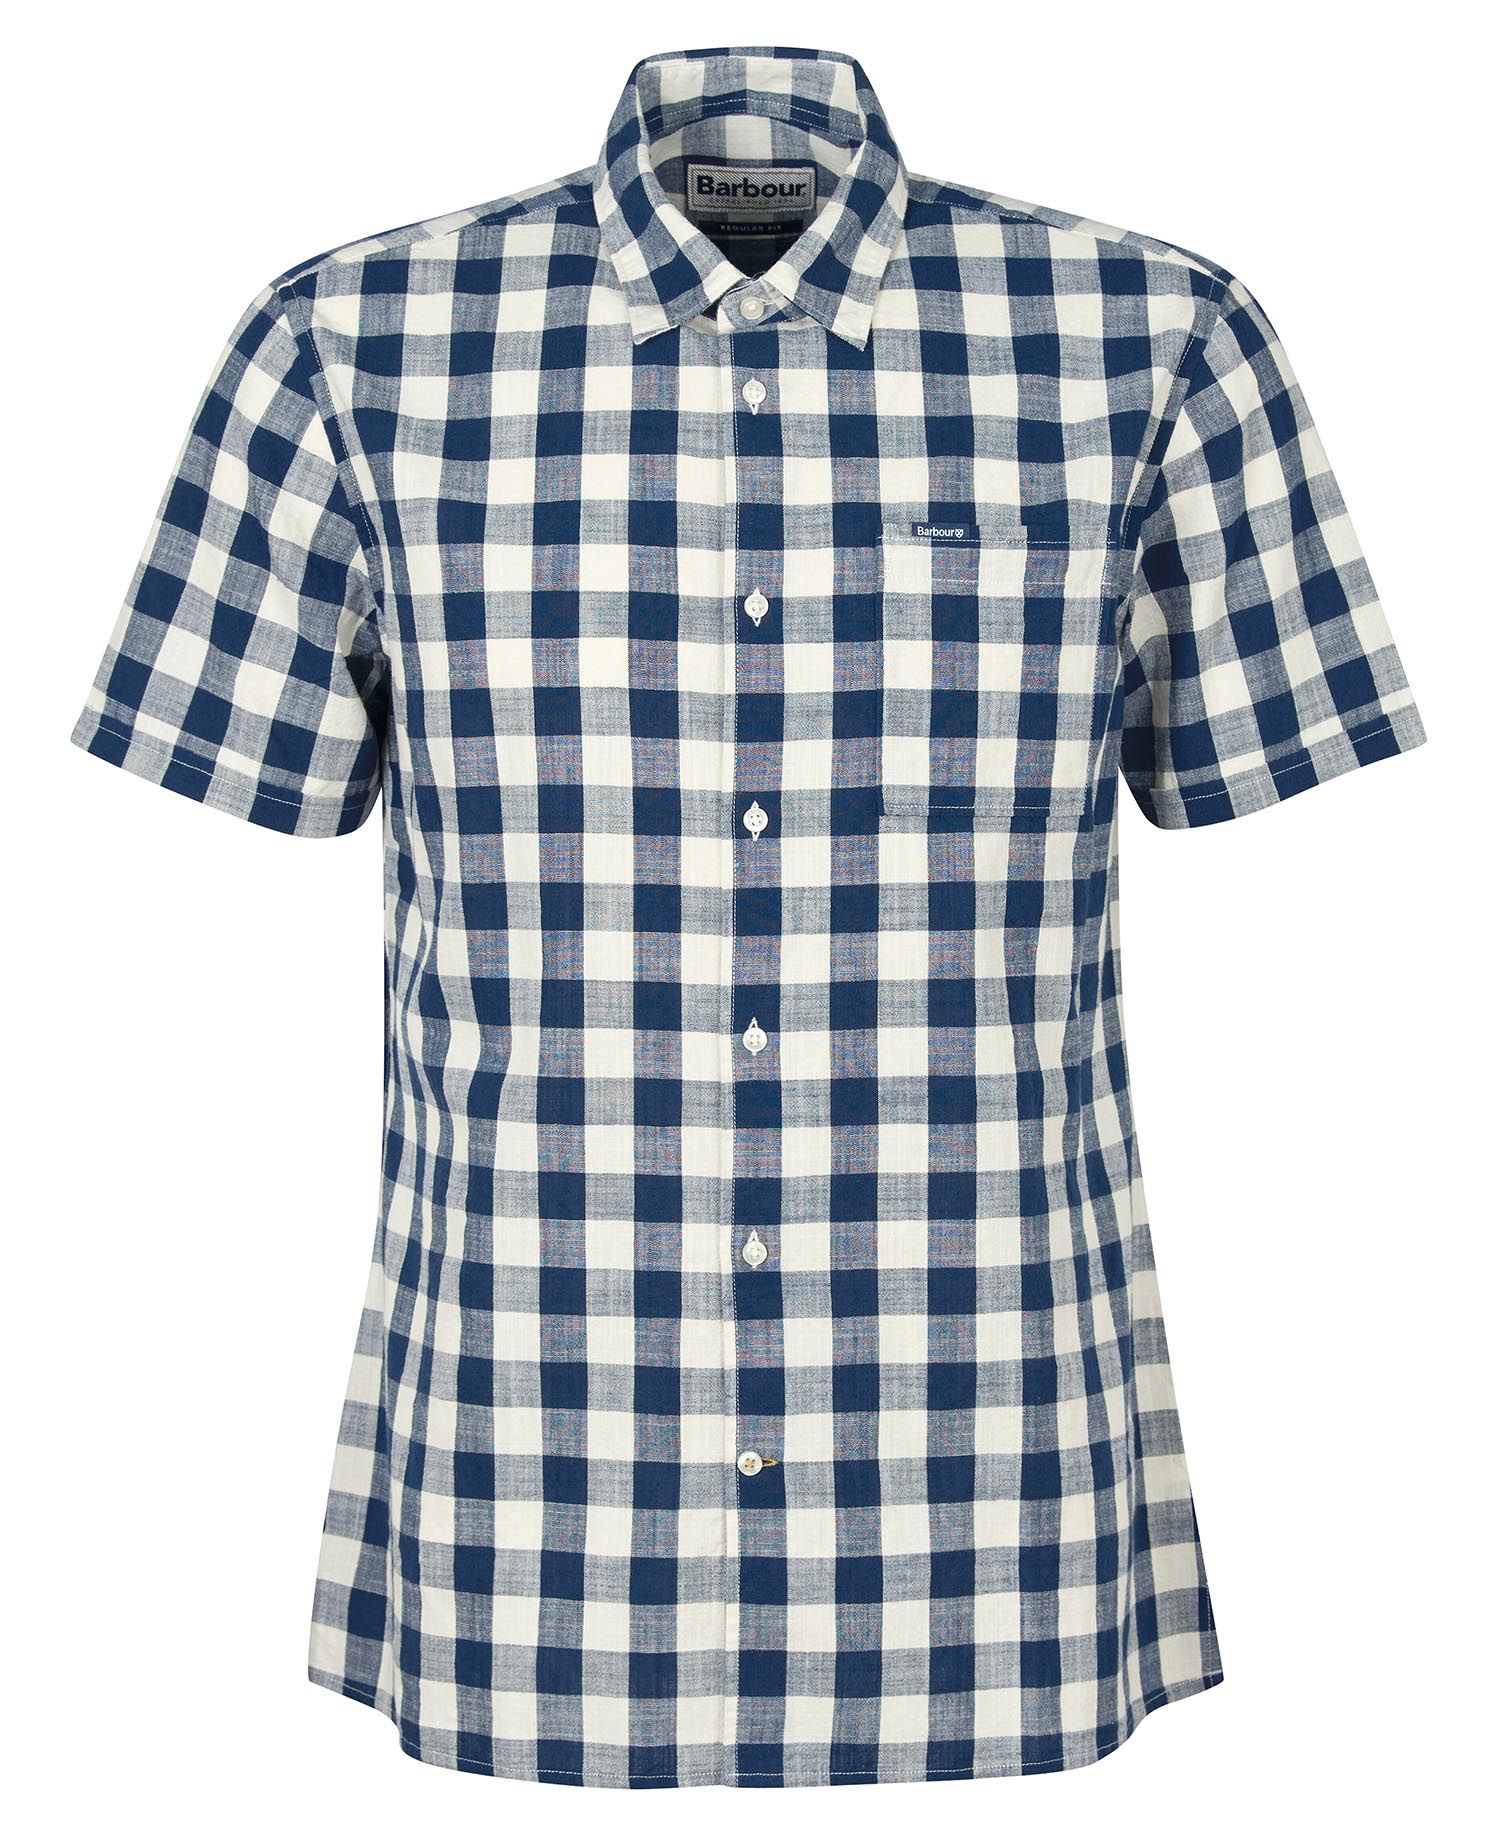 Barbour Hilson Tailored Shirt